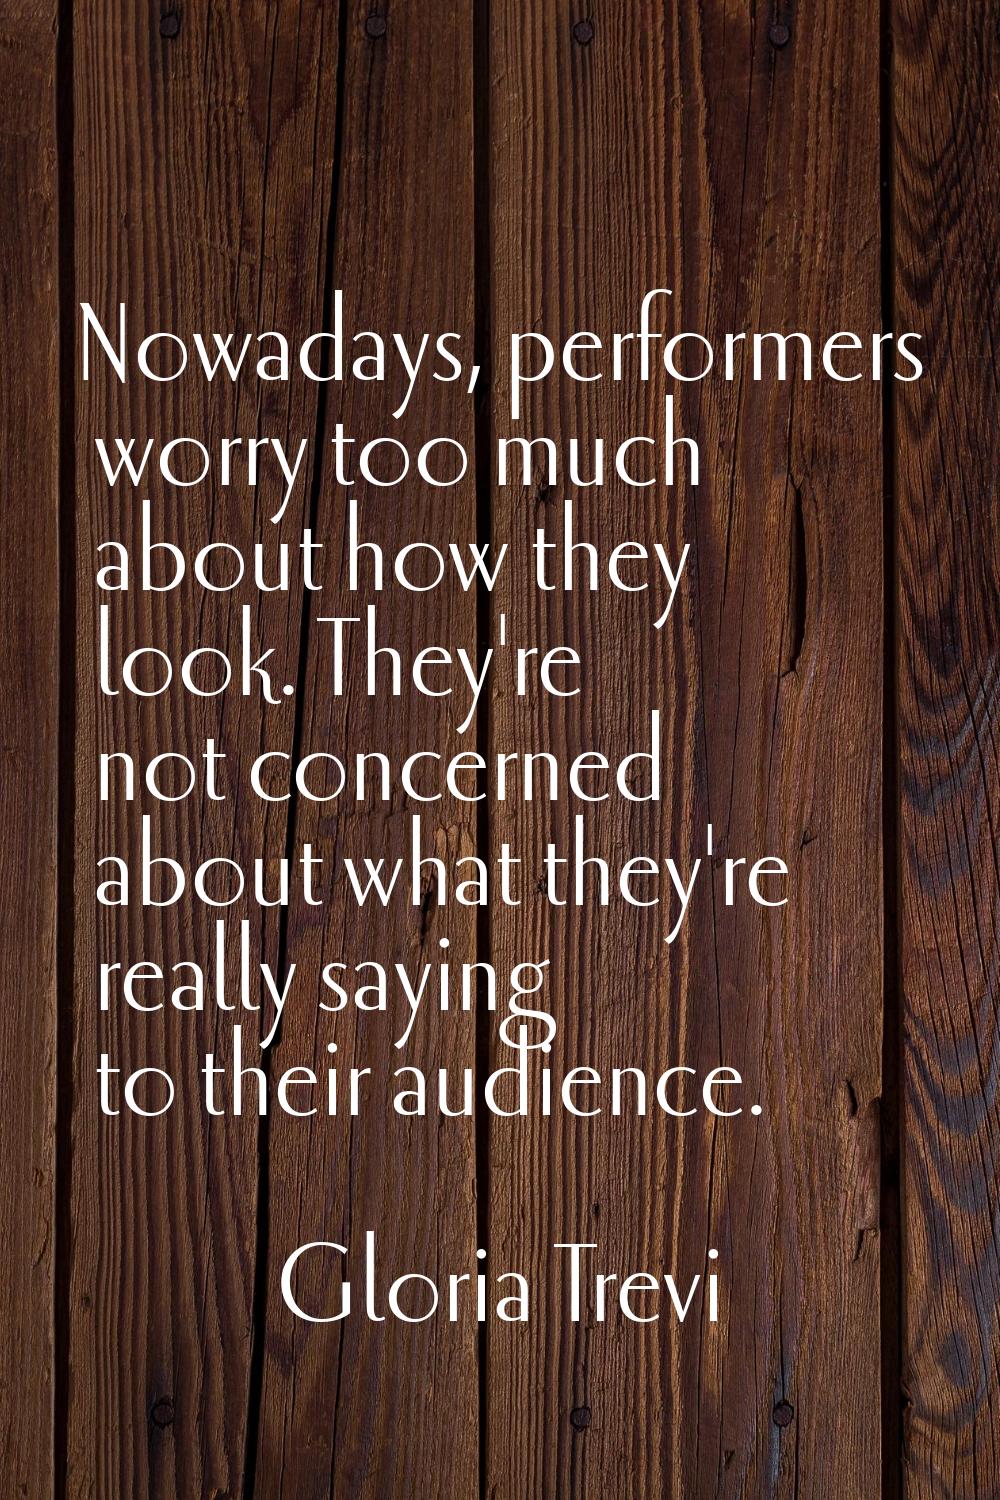 Nowadays, performers worry too much about how they look. They're not concerned about what they're r